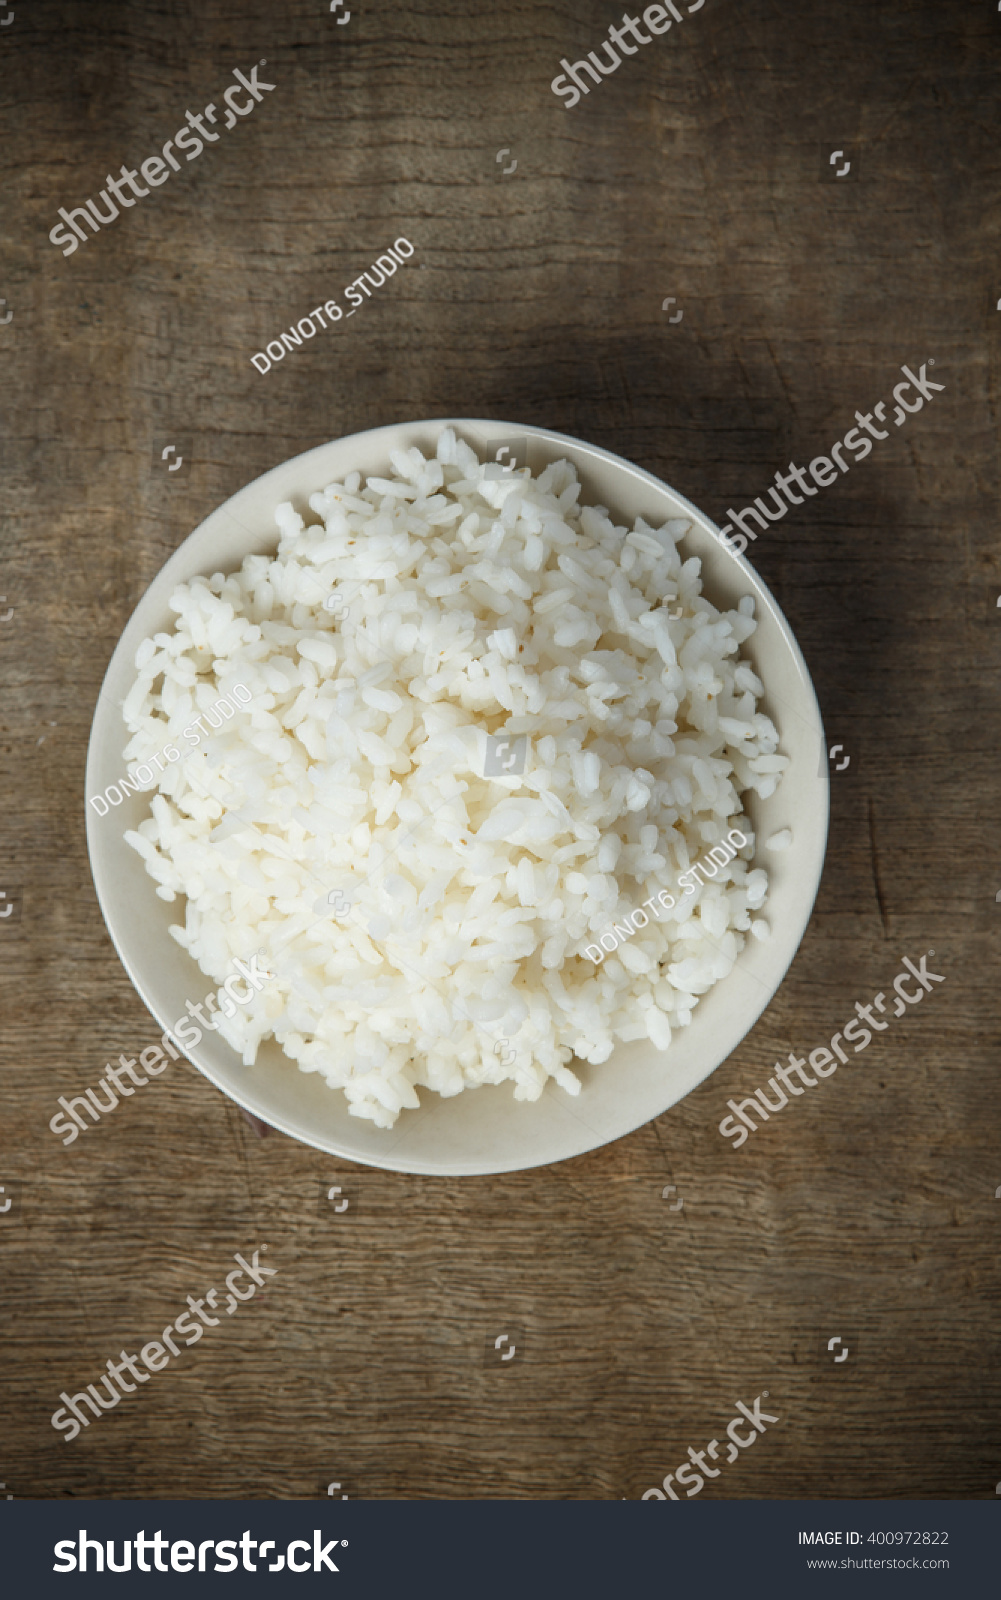 Cooked rice isolated on wooden background #400972822